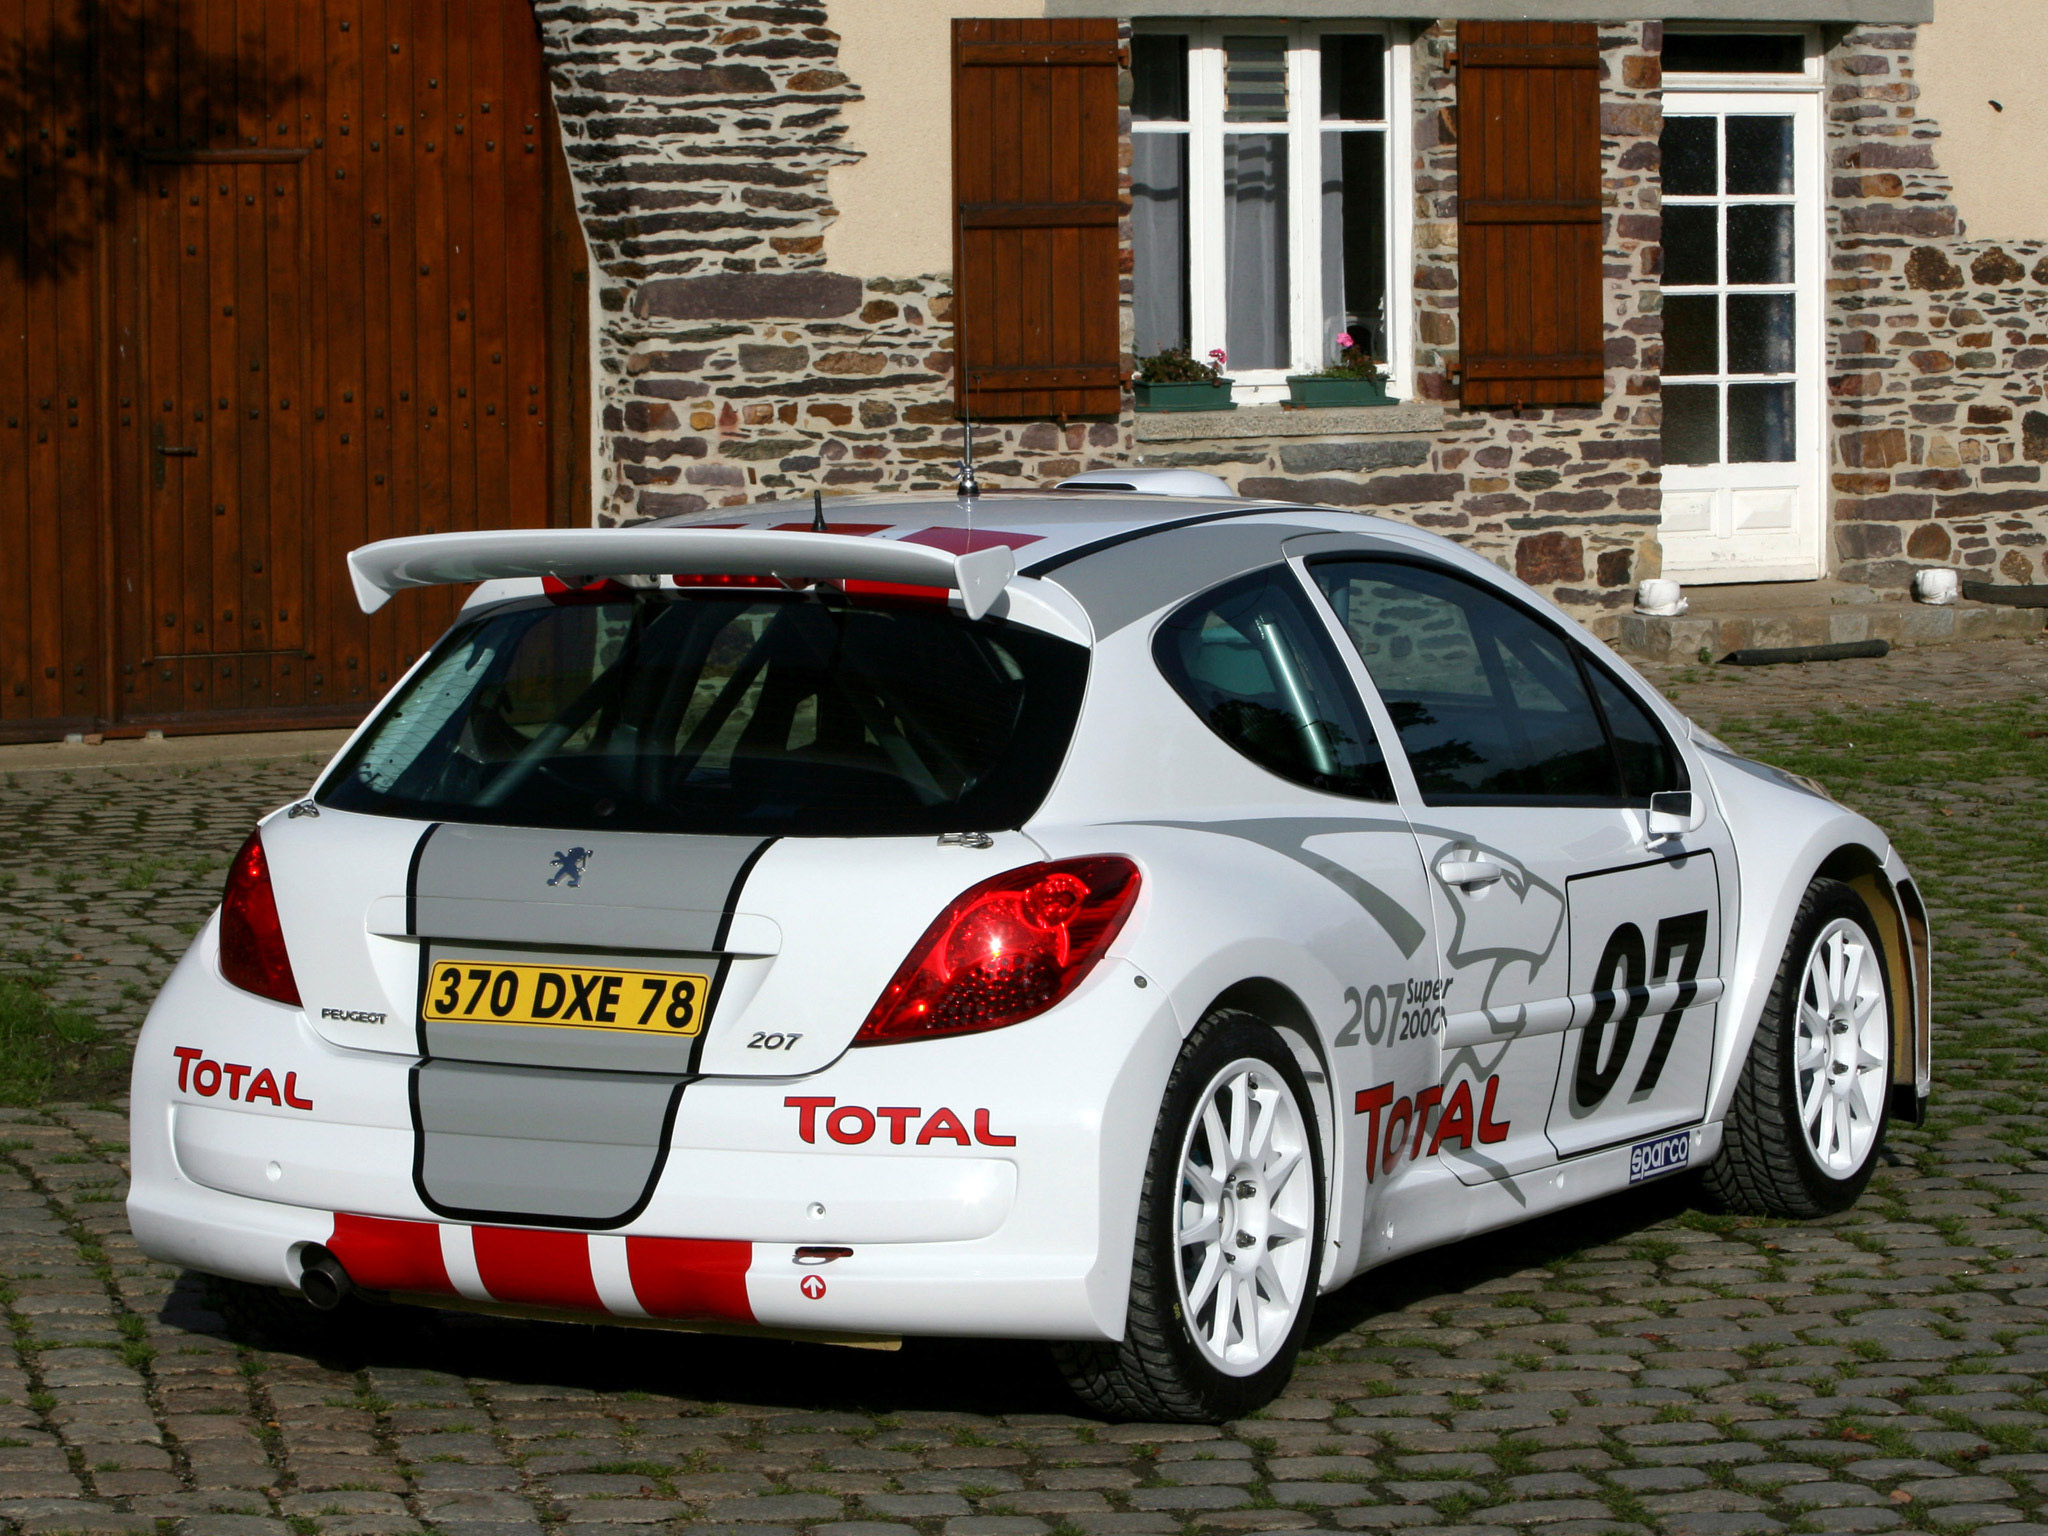 Car in pictures car photo gallery » Peugeot 207 S2000